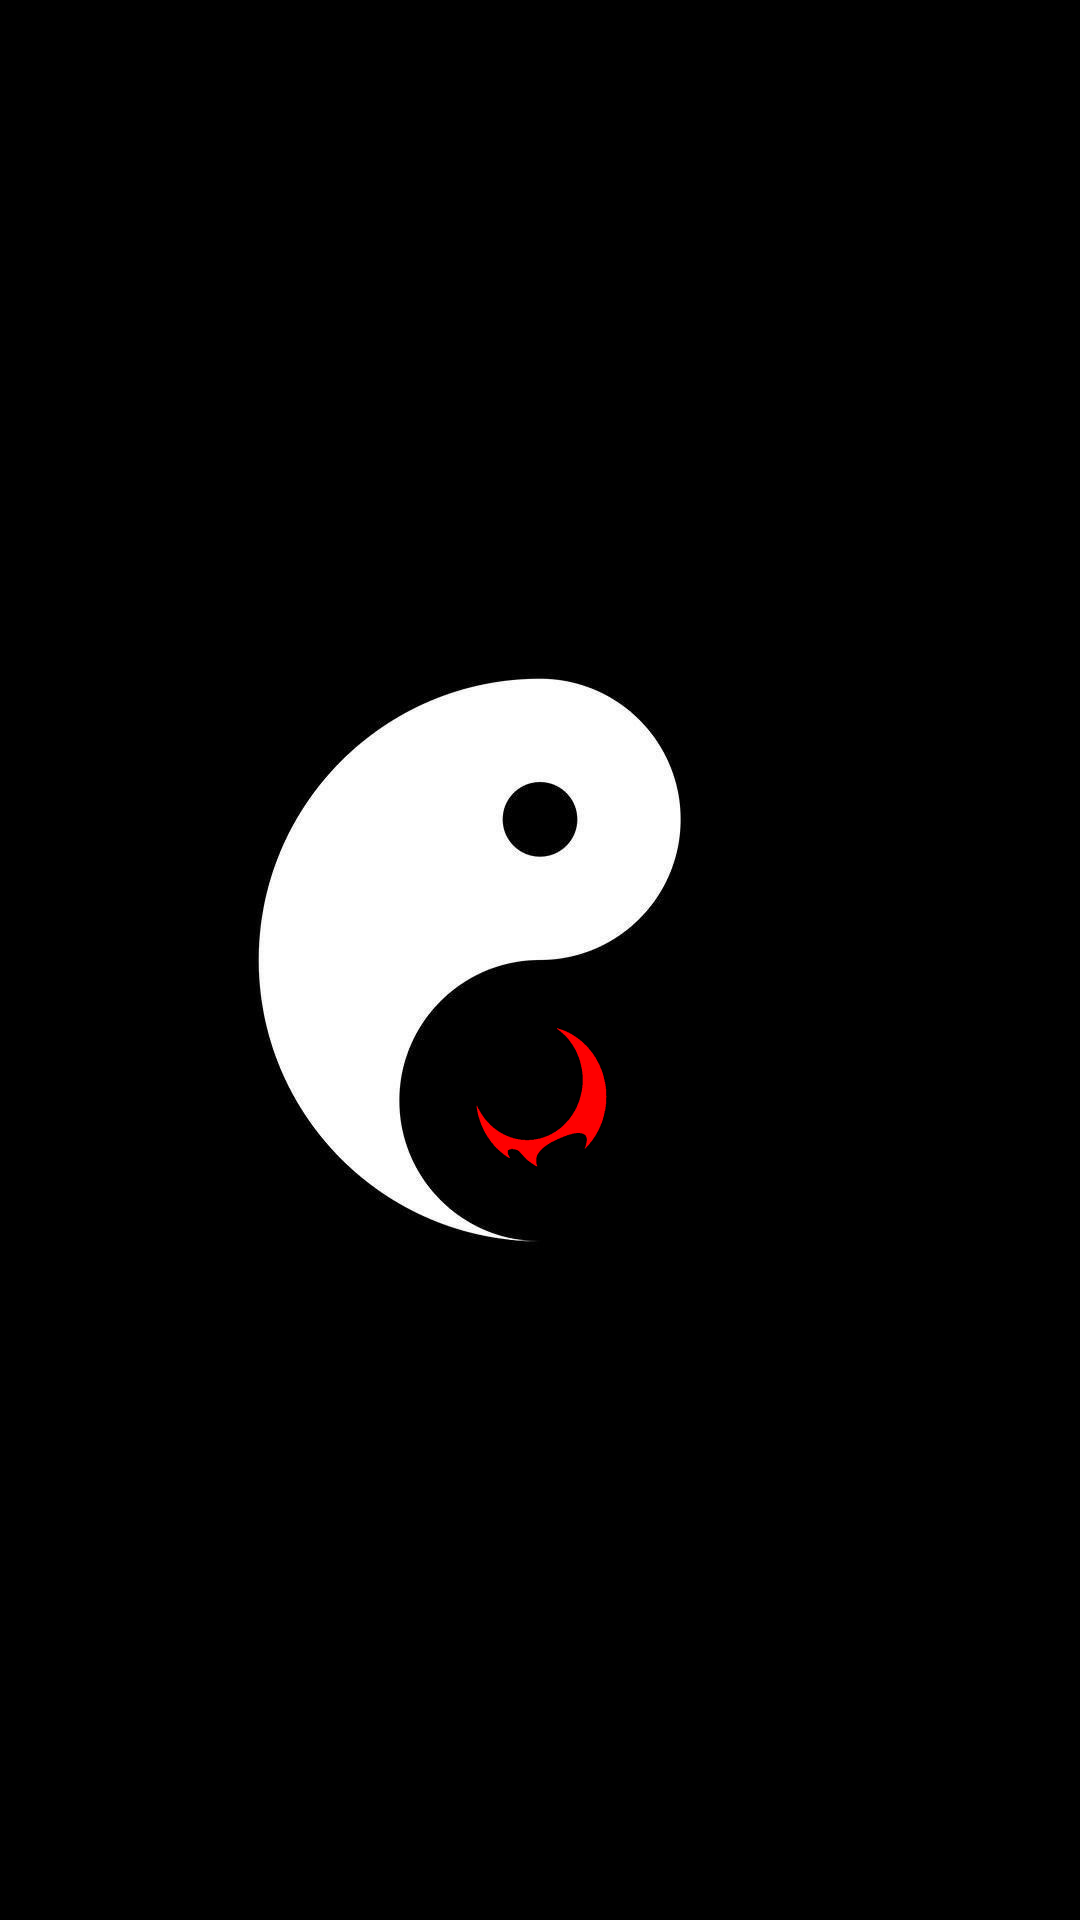 A minimalist yin yang wallpaper I made for my phone. I hope it can be of use to someone else too!